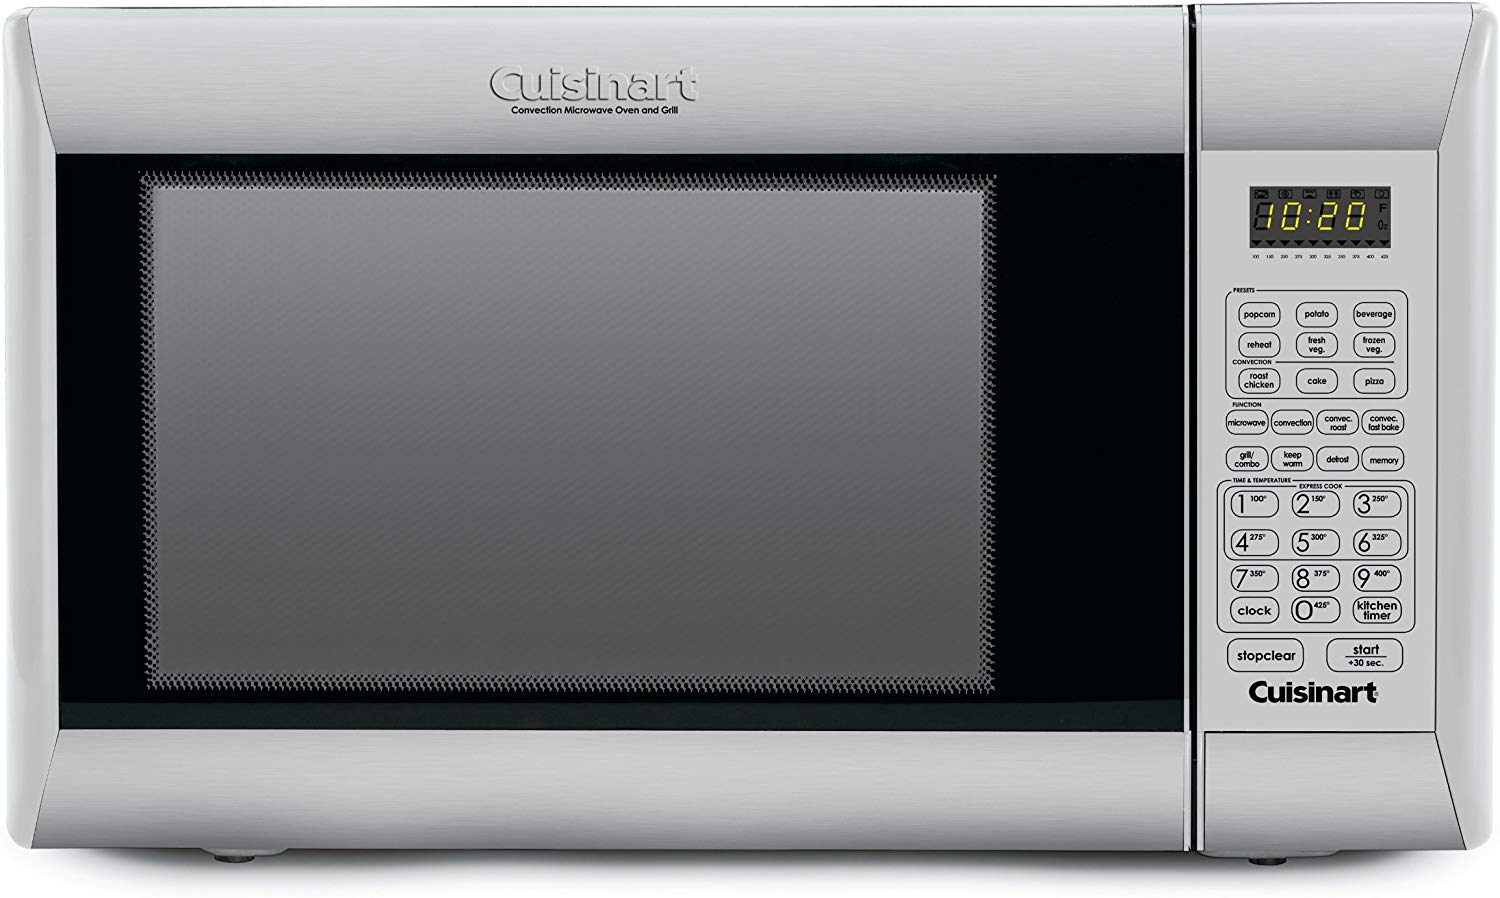 Airstream Convection Microwave Oven Stainless Steel by Cuisinart - 690605-03